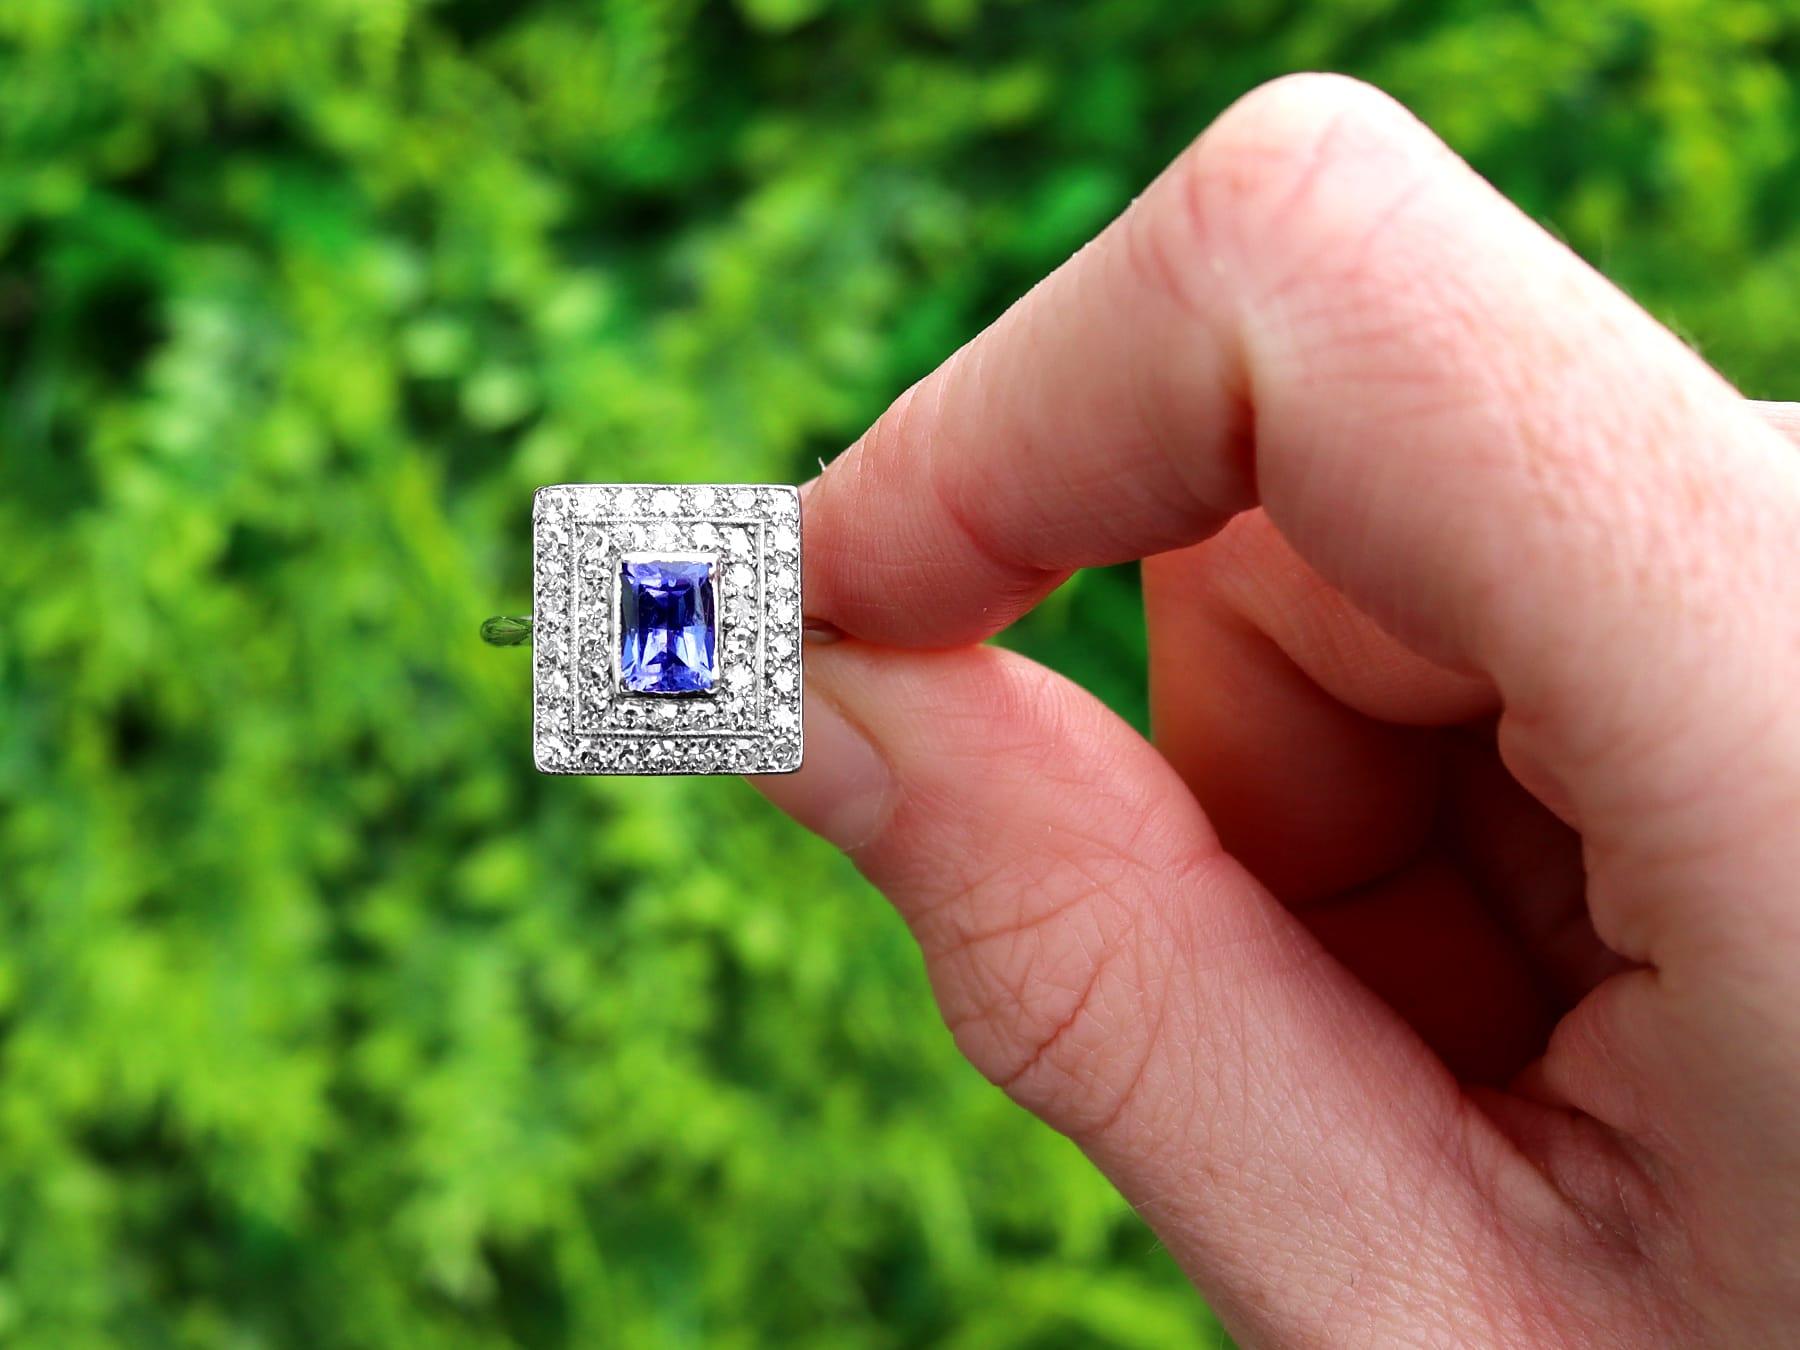 An impressive vintage 1940s 18 karat white gold and platinum set, 0.98 carat diamond cocktail ring set with a vintage 1990s 0.78 carat tanzanite ; part of our jewelry collections.

This fine and impressive vintage tanzanite ring has been crafted in